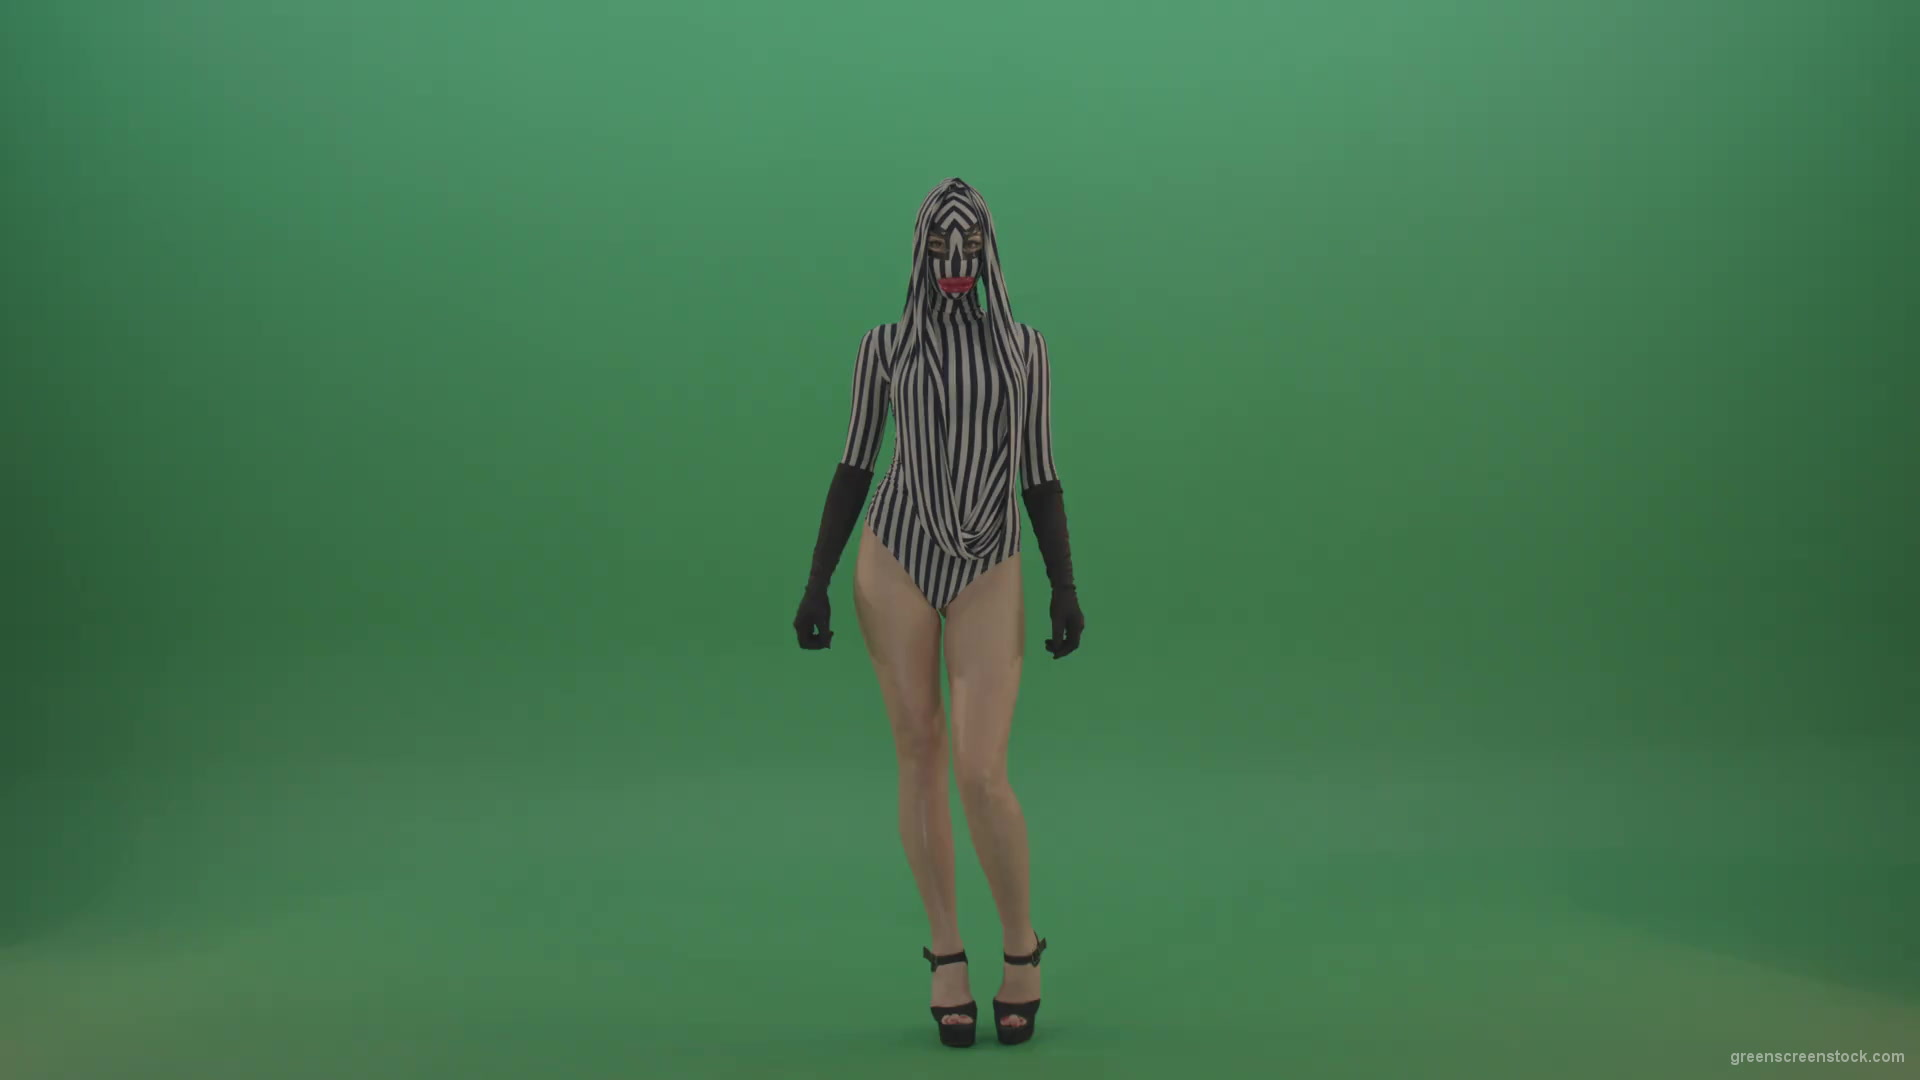 Long-legs-girl-march-in-white-black-stripe-costume-and-mask-on-green-screen-1920_001 Green Screen Stock